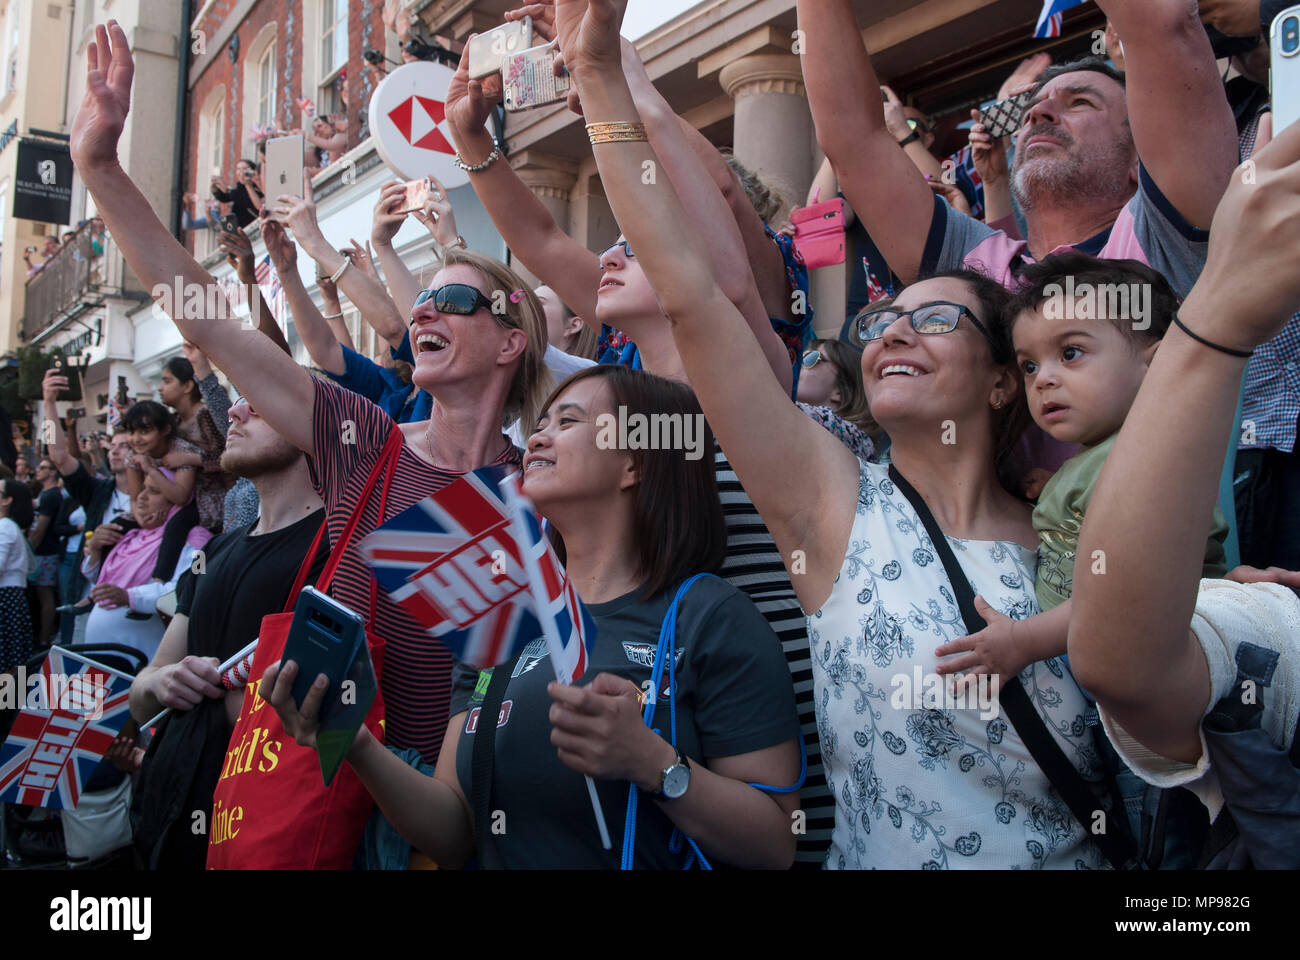 Royal Wedding Prince Harry Meghan Markle 19 19th May 2018 people in crowd with mobile devises  smartphone, smartphones, phones. HOMER SYKES Stock Photo